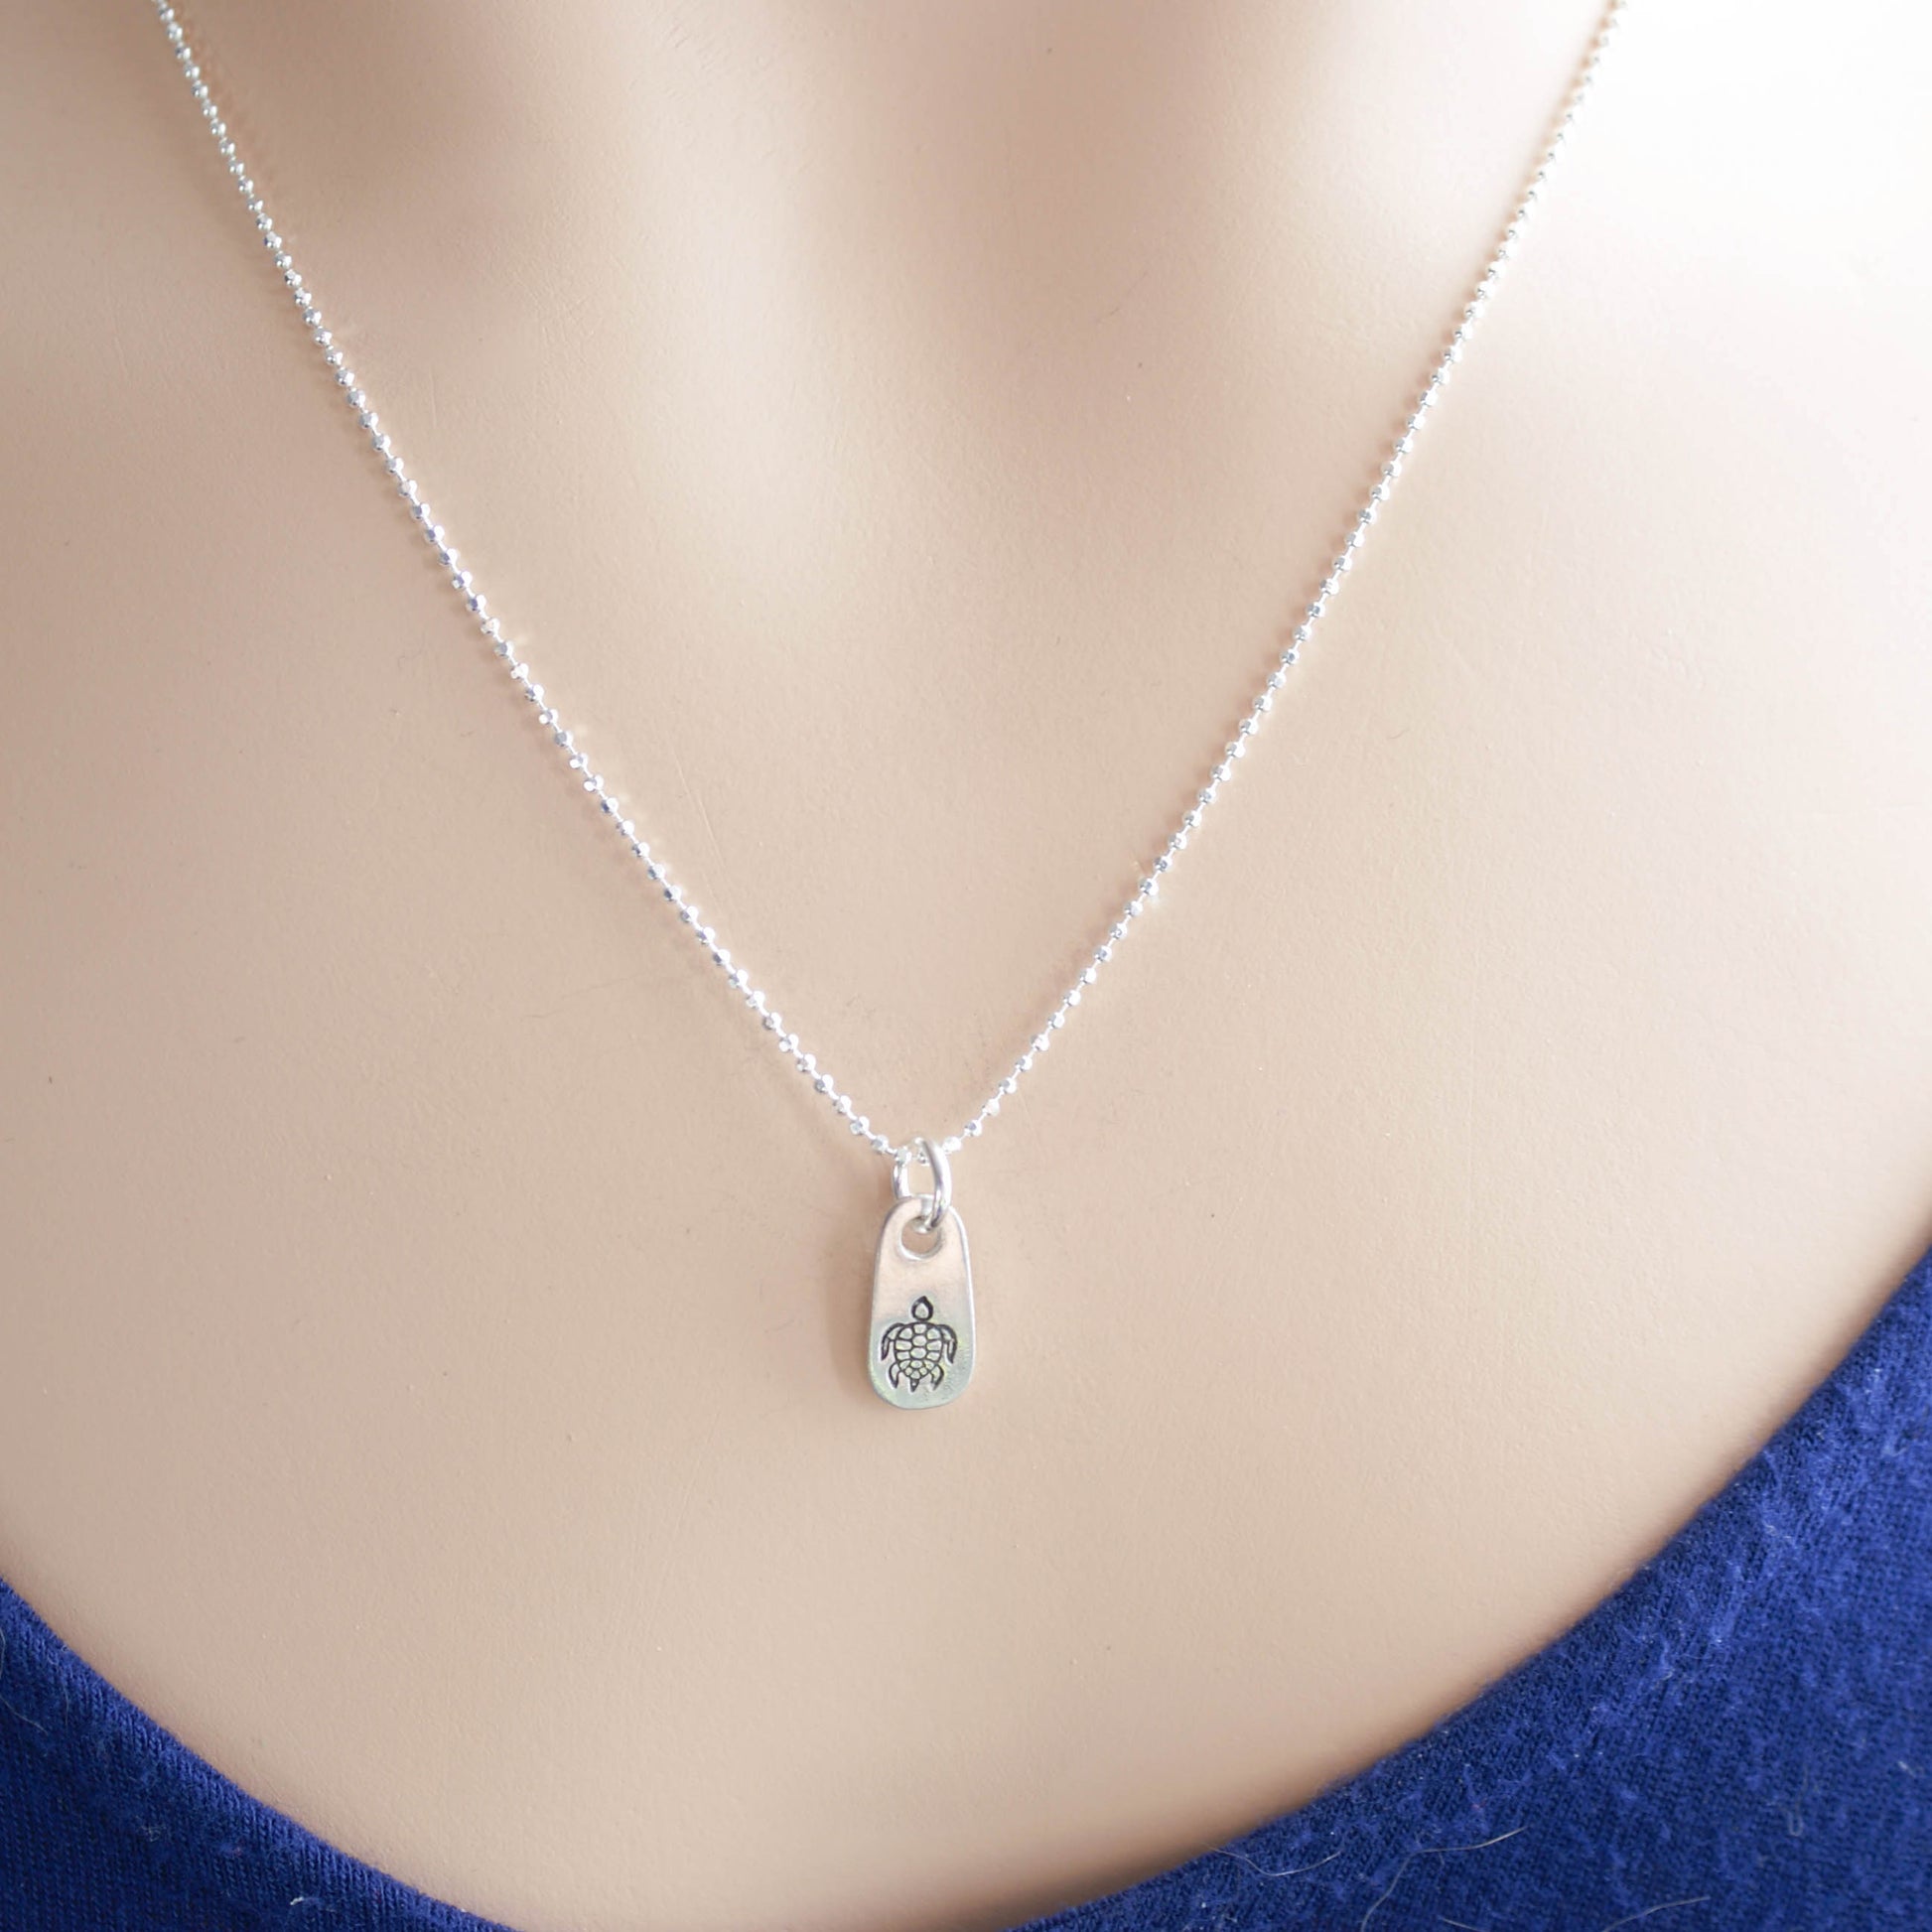 Silver sea turtle necklace in artisan pewter on neck